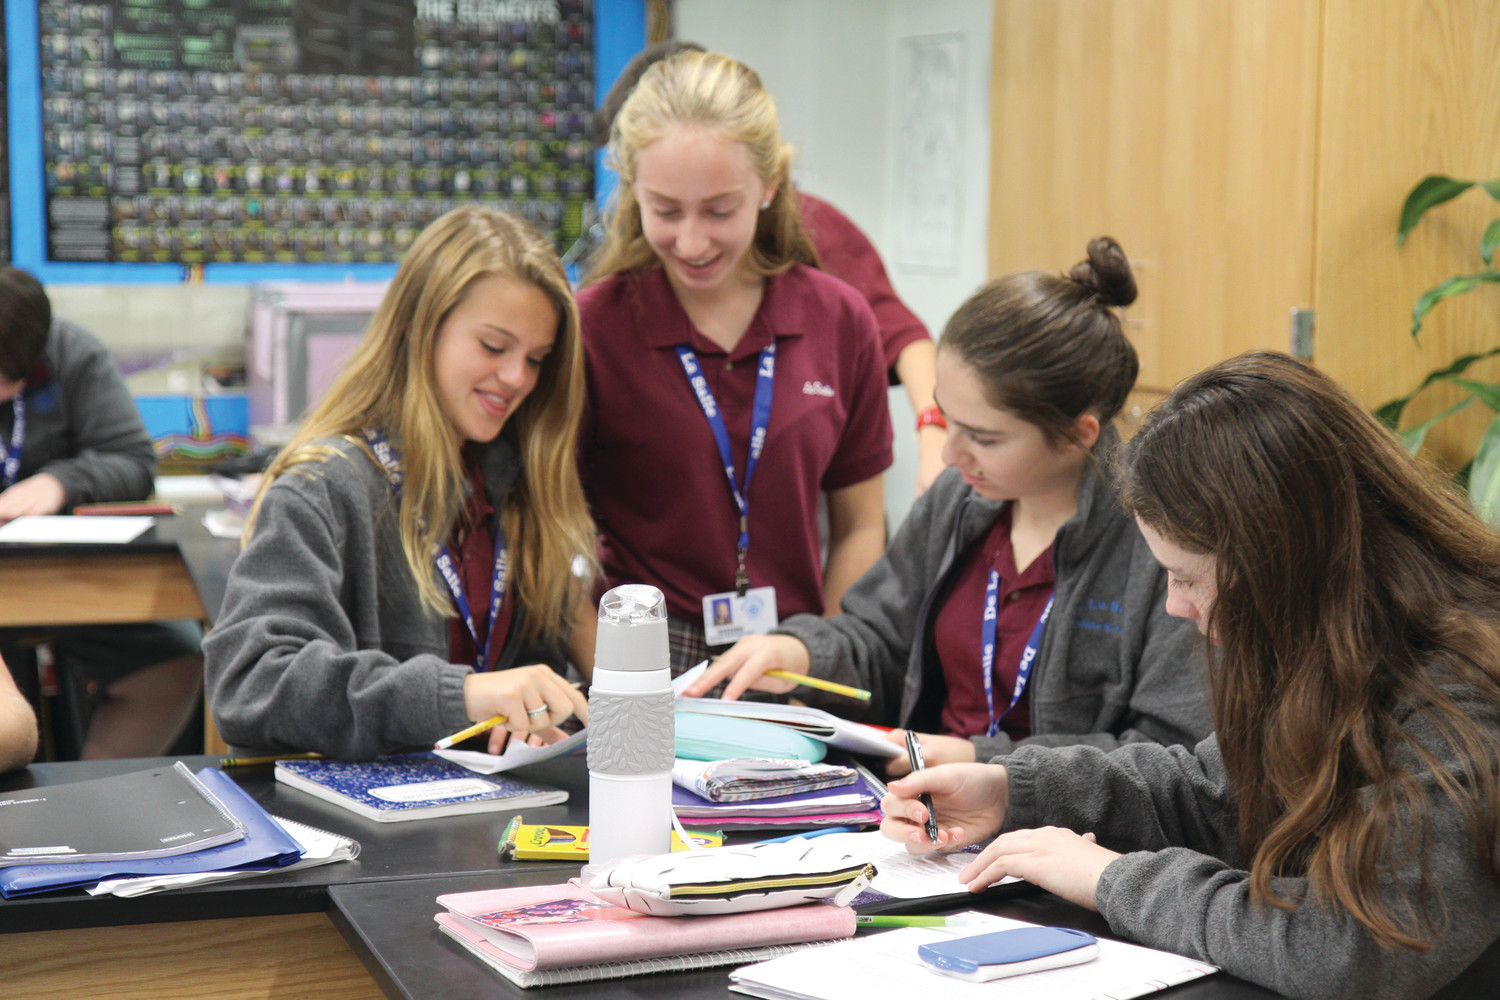 Students at La Salle Academy work together on classwork. Creating work spaces that support group-centered, technology-integrated learning is one of the priorities of many schools’ current renovation projects.